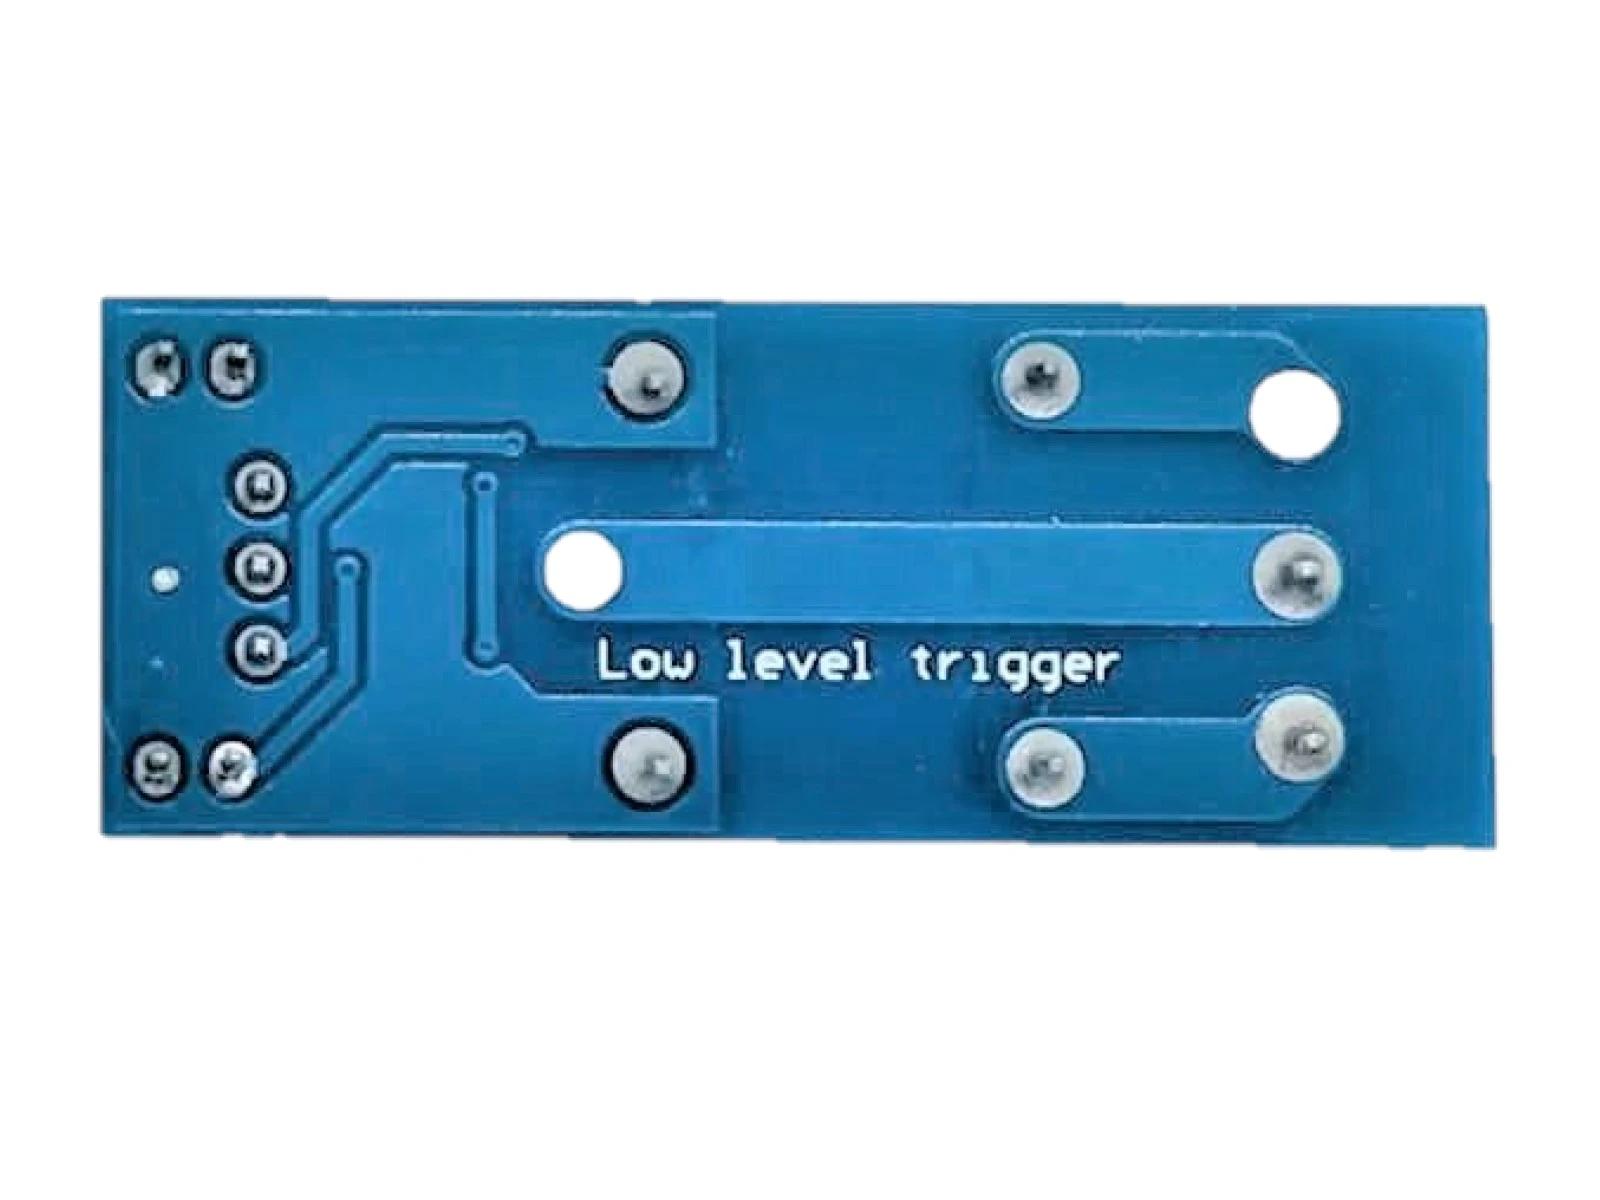 5V 10A 1 Channel Relay Module Low Level Trigger